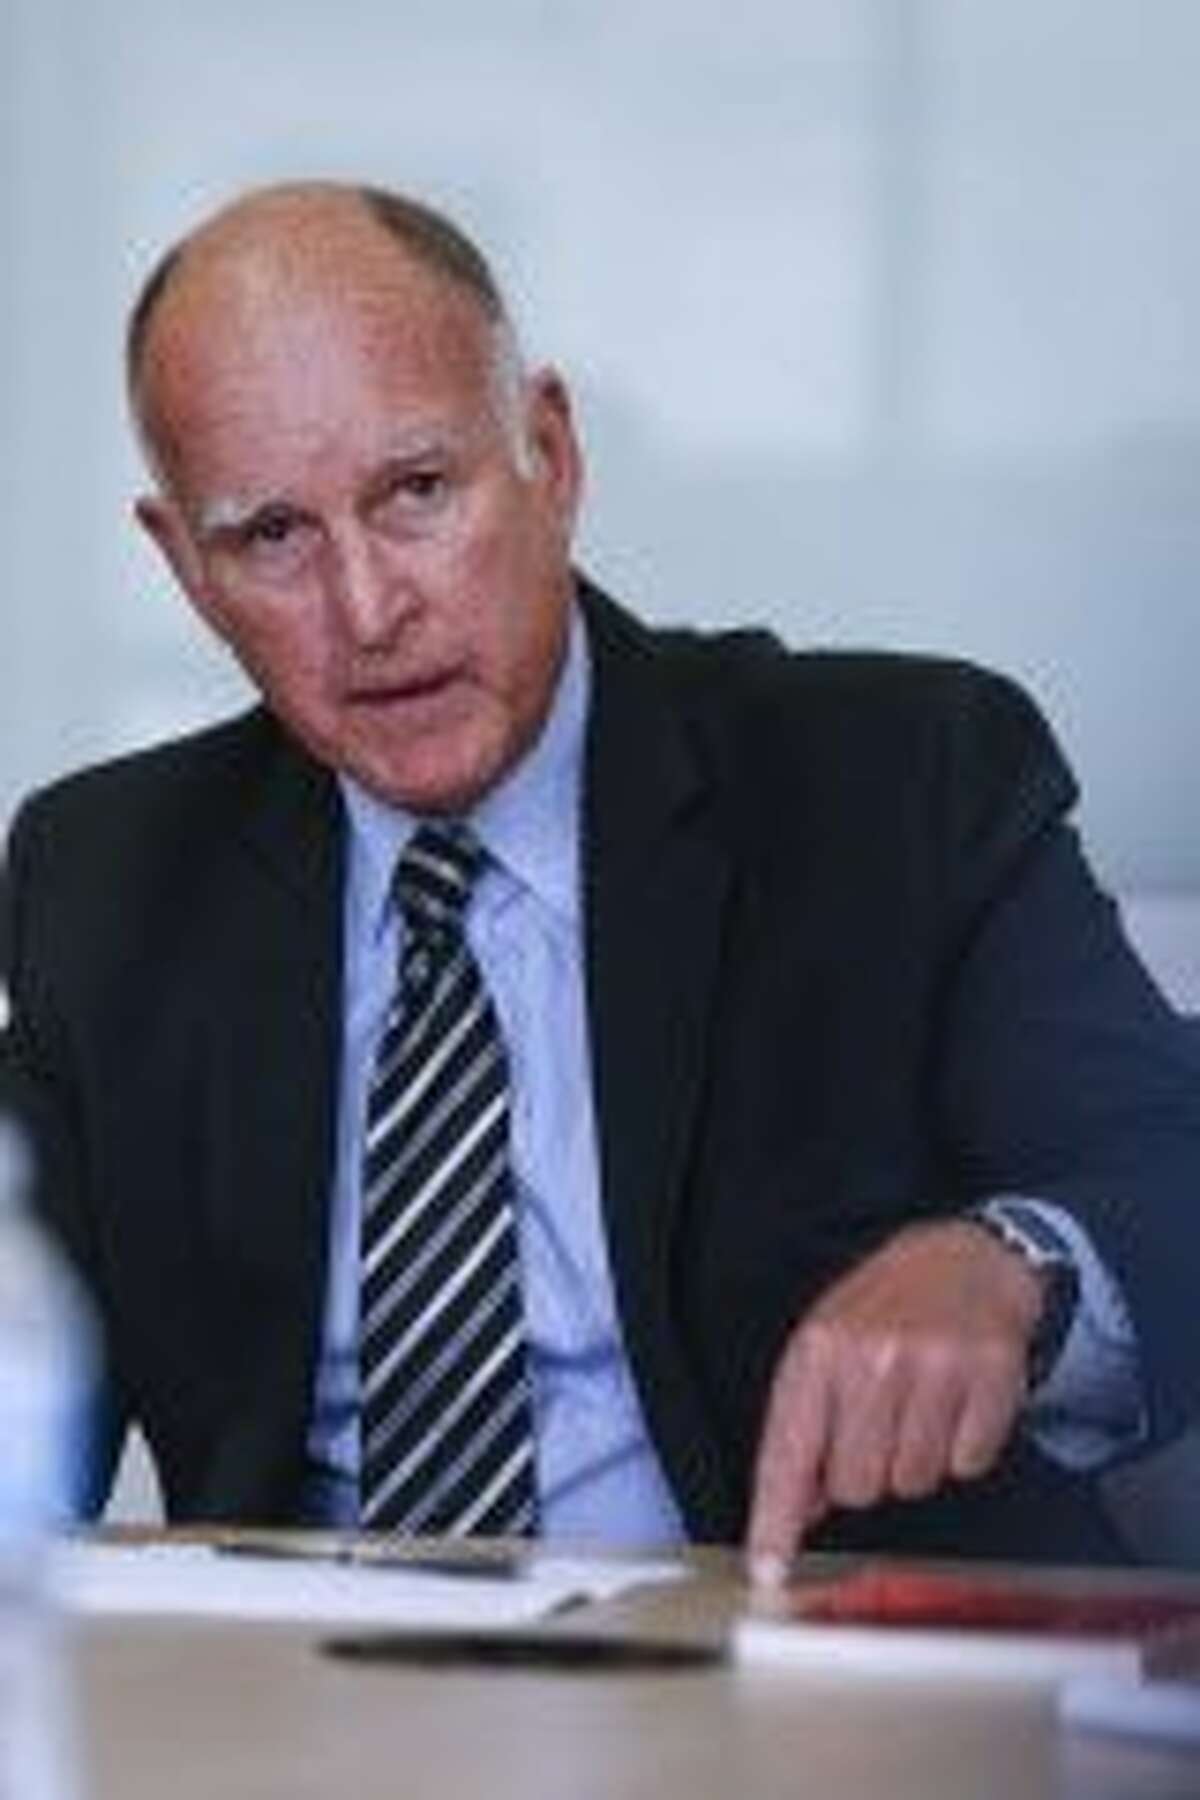 Gov. Jerry Brown speaks to the SF Chronicle Editorial Board about Proposition 57, which would change sentencing guidelines, on Friday, Sept. 9, 2016 in San Francisco, Calif.